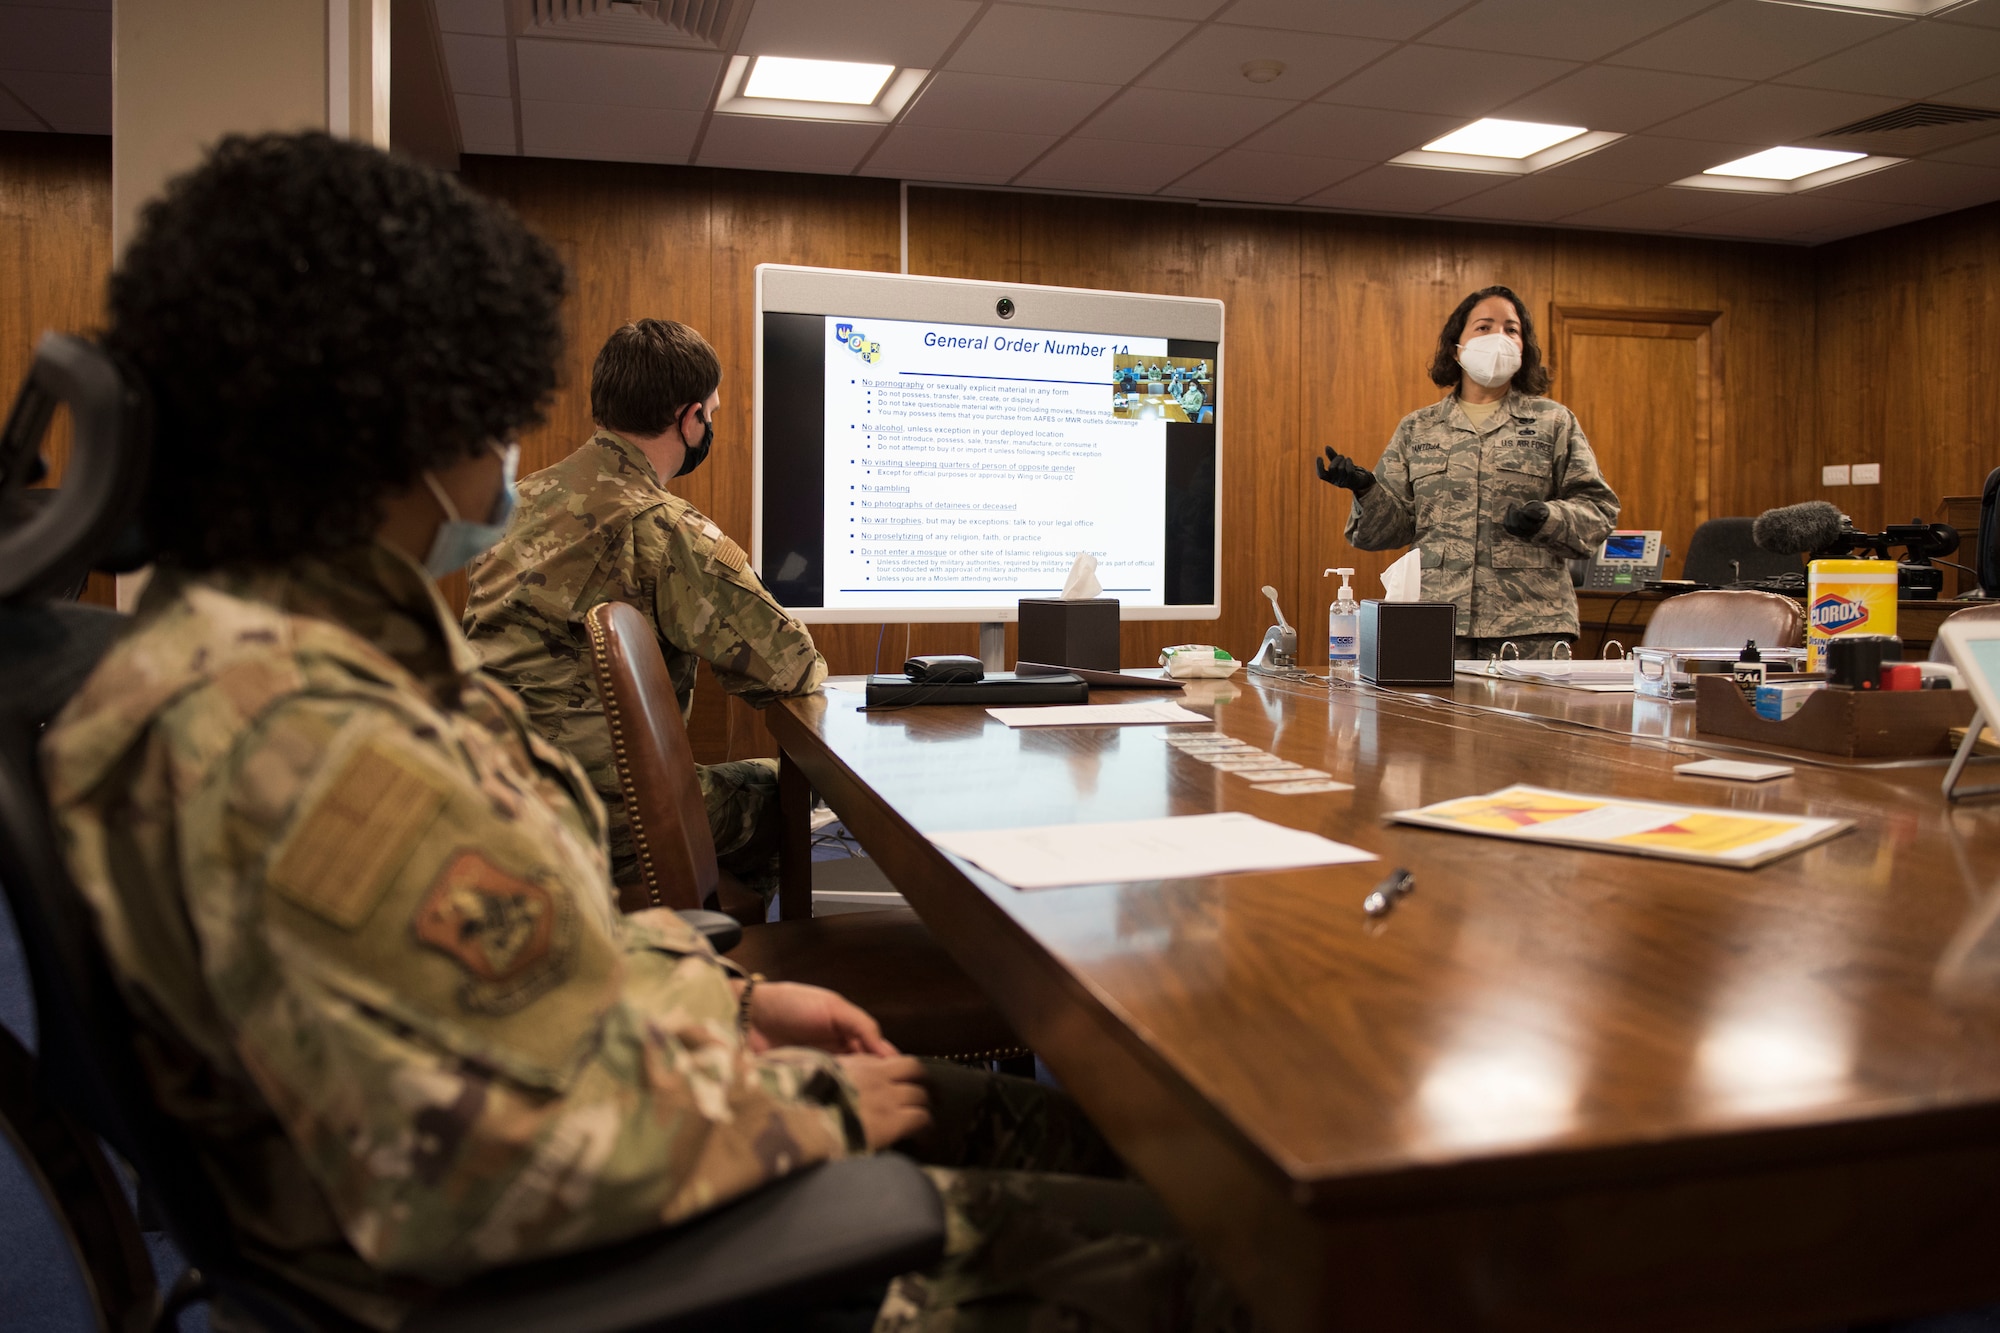 U.S. Air Force Master Sgt. Miriam Pantoja, 501st CSW Judge Advocate Office, NCOIC of general law, conducts a deployment brief June 2, 2020, at RAF Alconbury, England. The 501st Combat Support Wing legal office hosted a deployment brief and will execution ceremony for all Security Forces deploying in the next 60 days. (U.S. Air Force photo by Airman 1st Class Jennifer Zima)